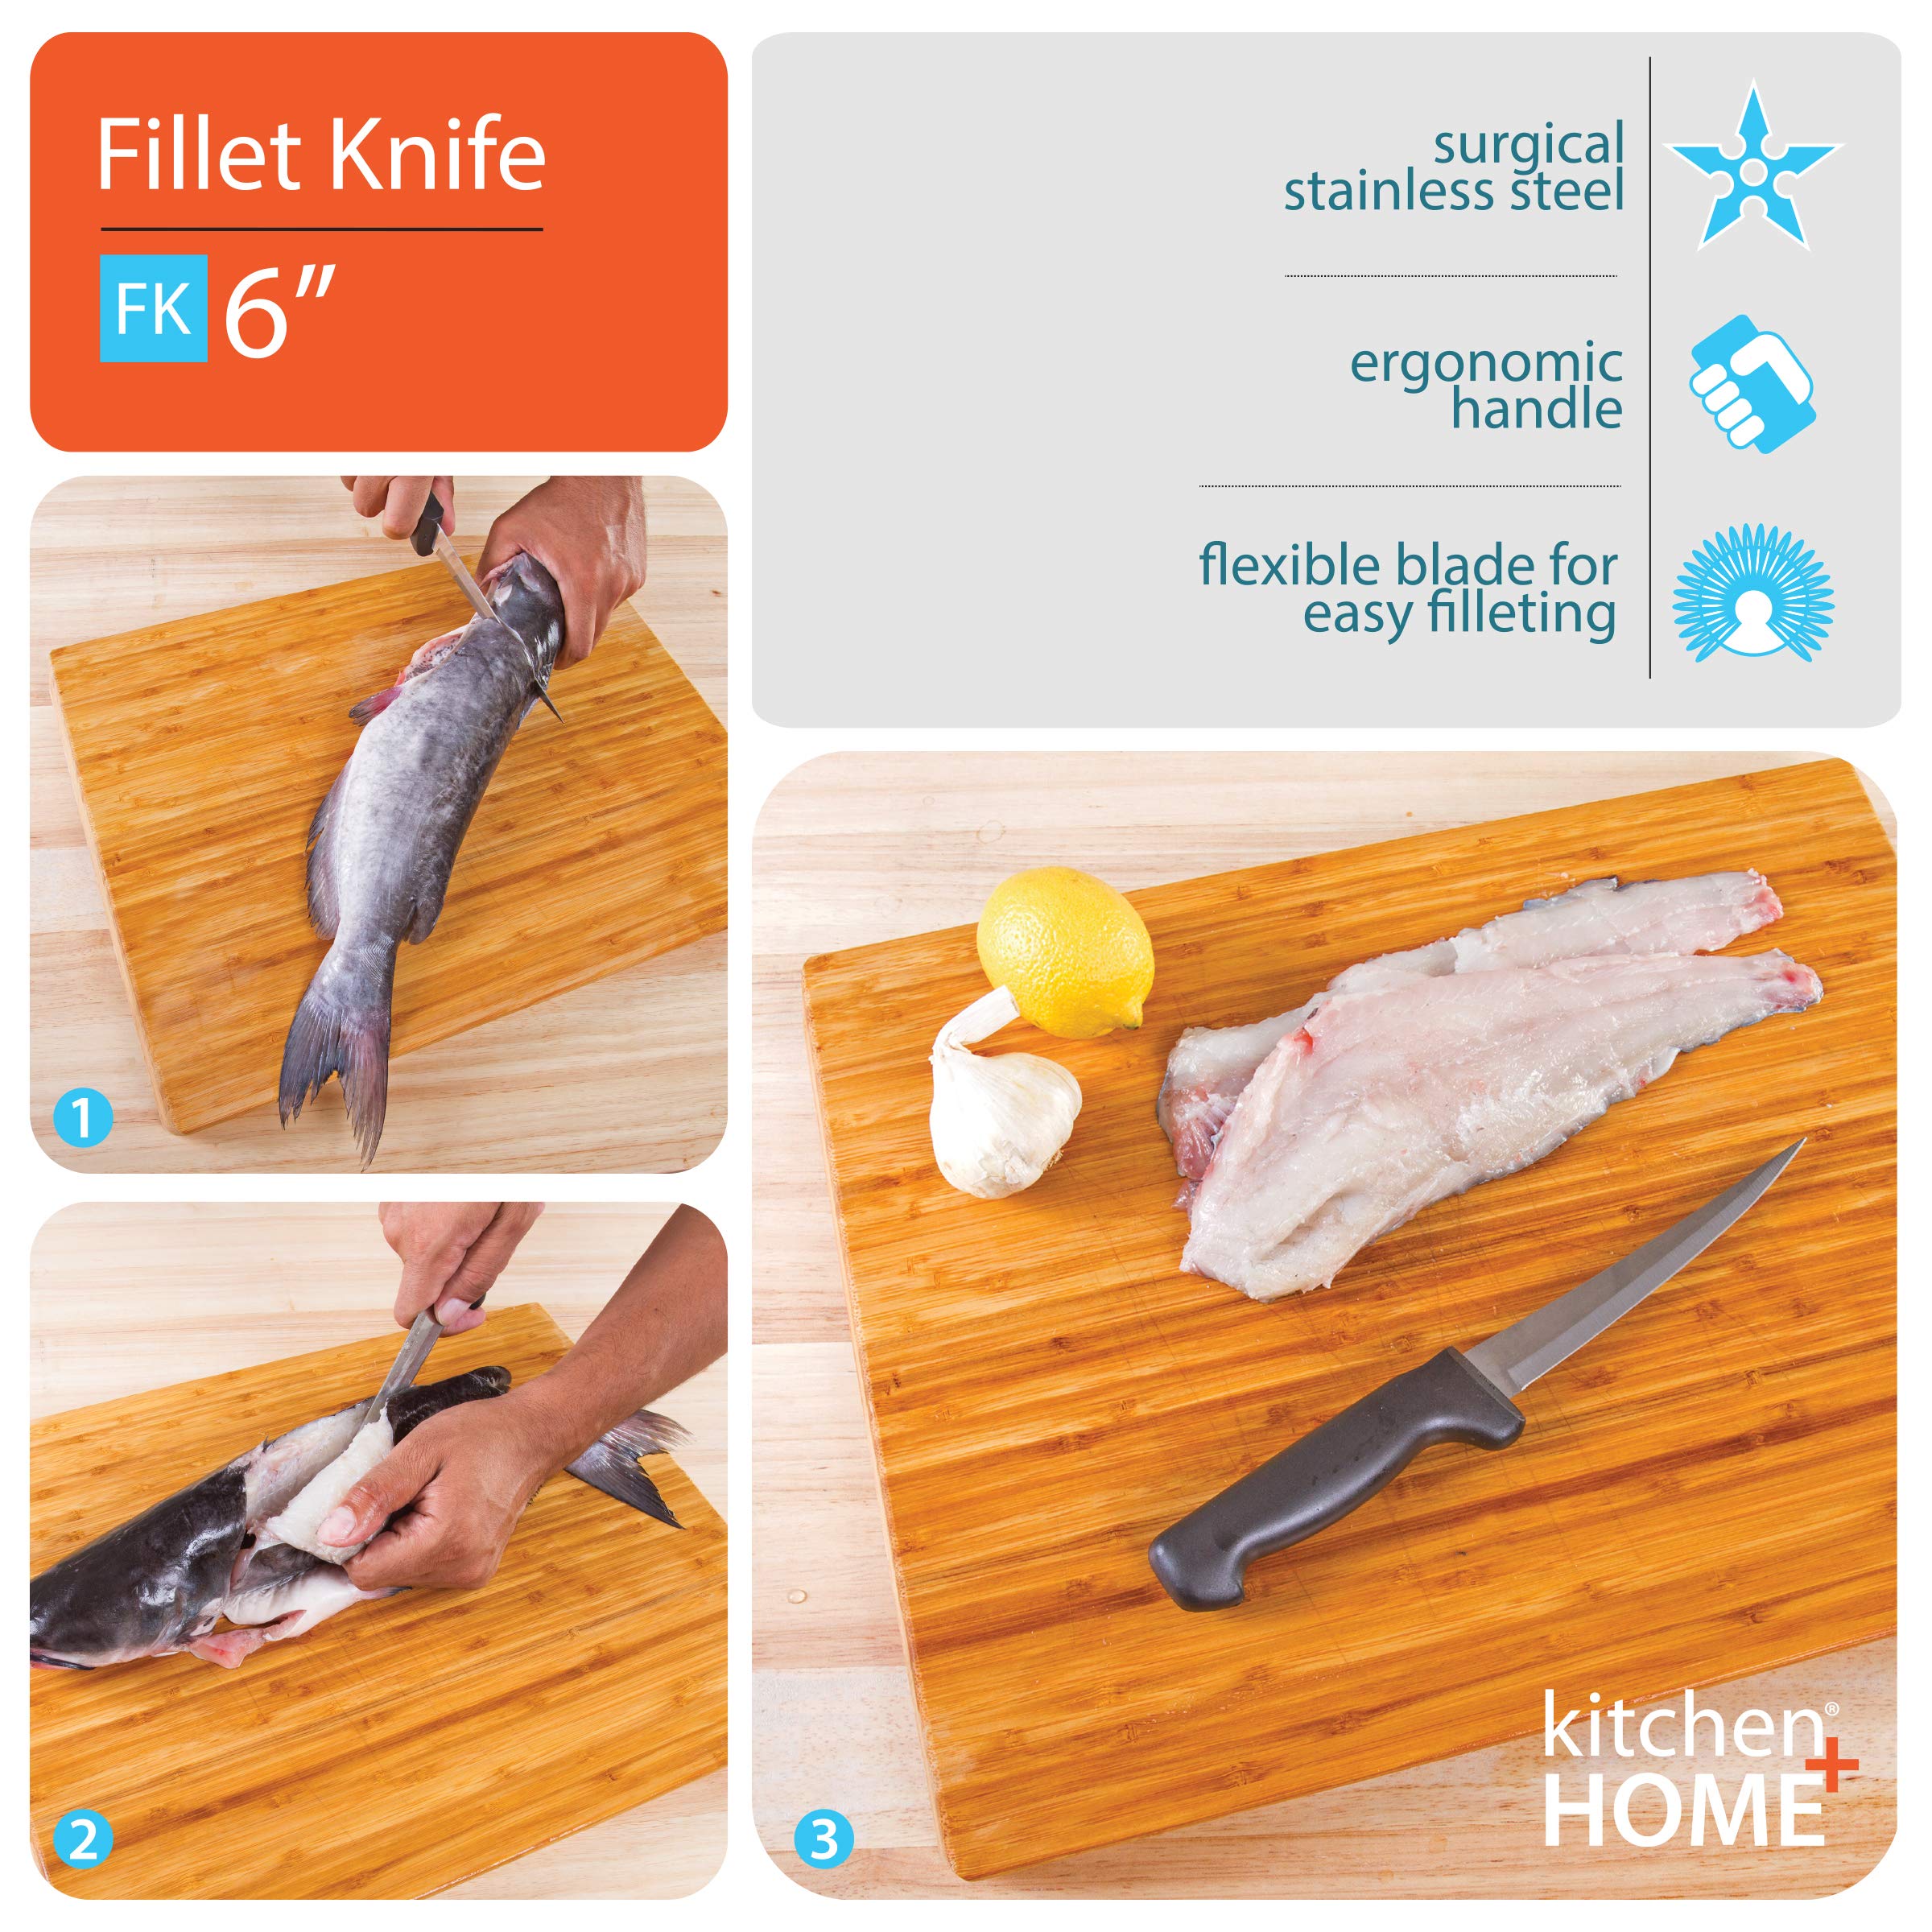 Kitchen + Home Fillet Knife – Flexible 7” Ultra Sharp Surgical Stainless Steel Curved Boning Knife